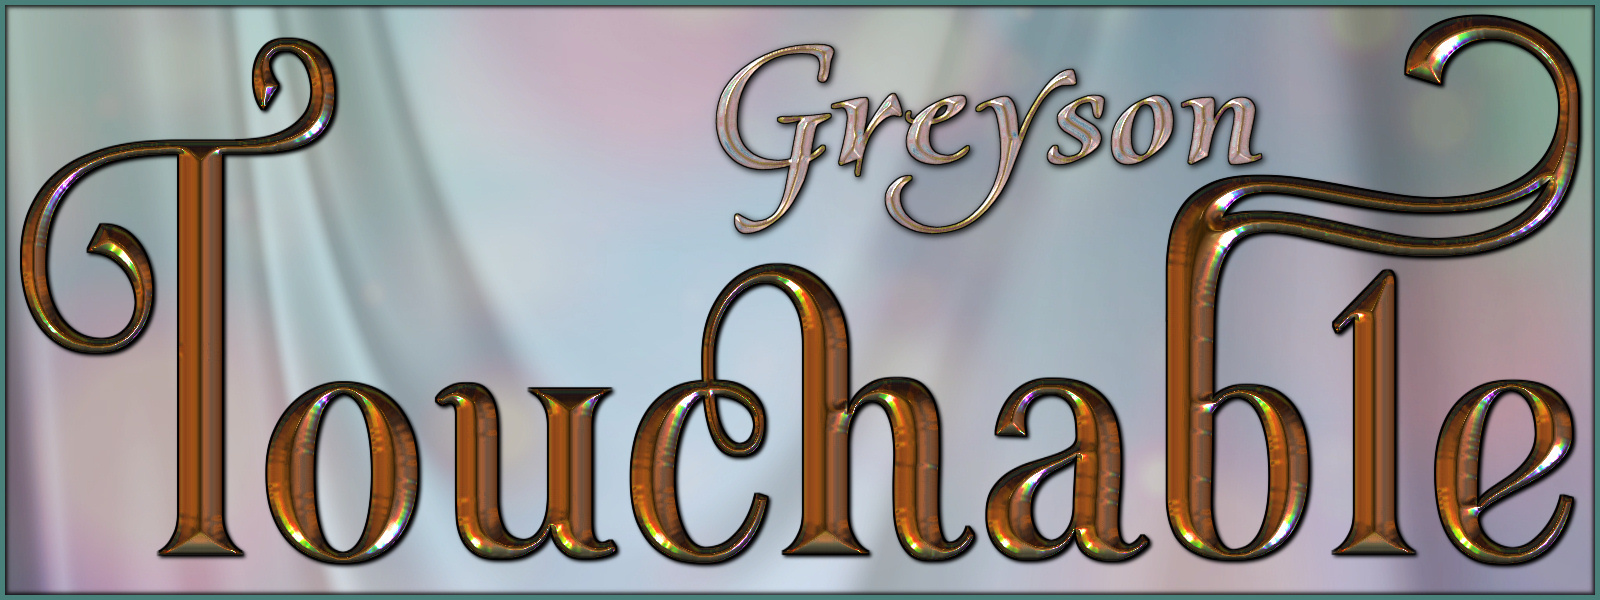 Touchable Greyson by: ~Wolfie~, 3D Models by Daz 3D